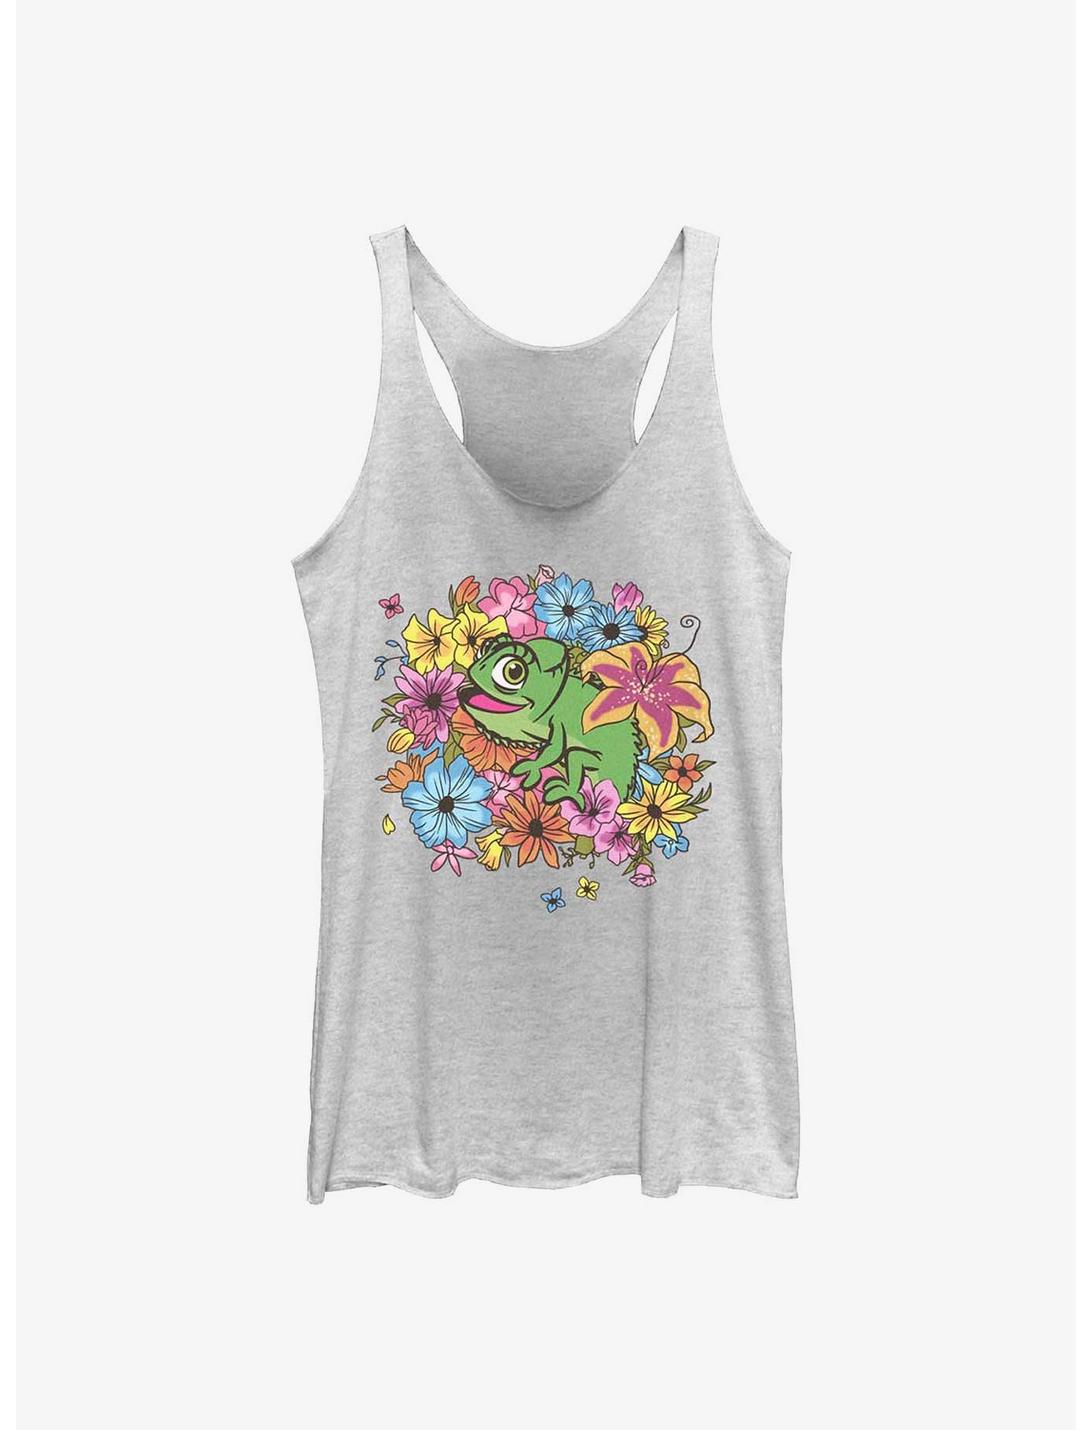 Disney Tangled Floral Pascal Womens Tank Top, WHITE HTR, hi-res